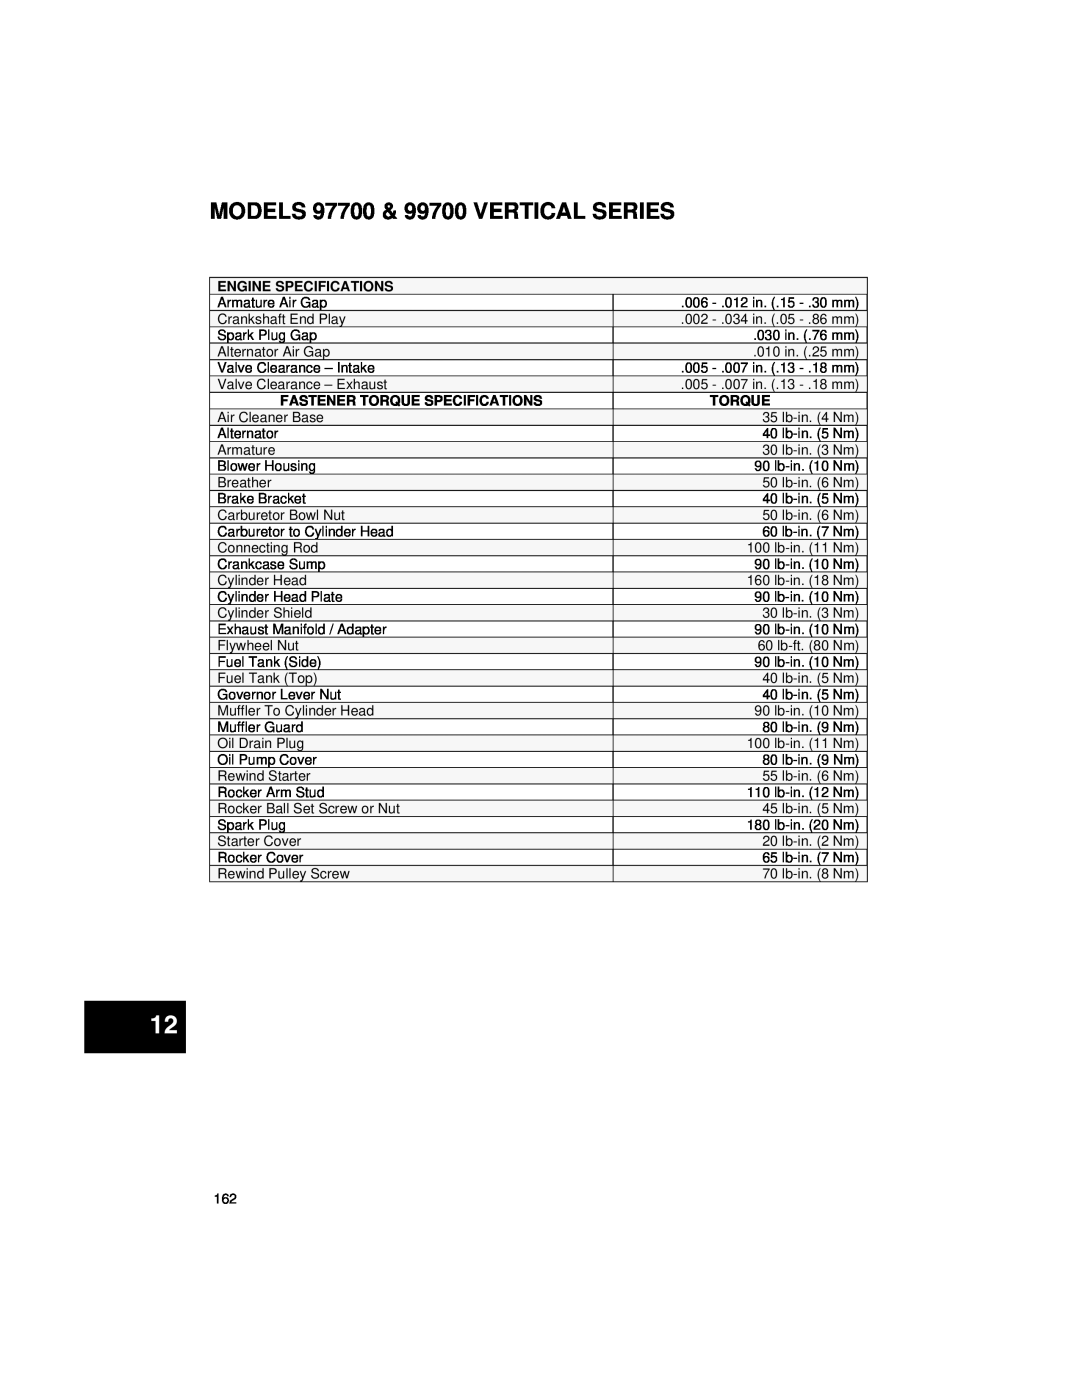 Briggs & Stratton 271172 manual MODELS 97700 & 99700 VERTICAL SERIES, Engine Specifications, Fastener Torque Specifications 